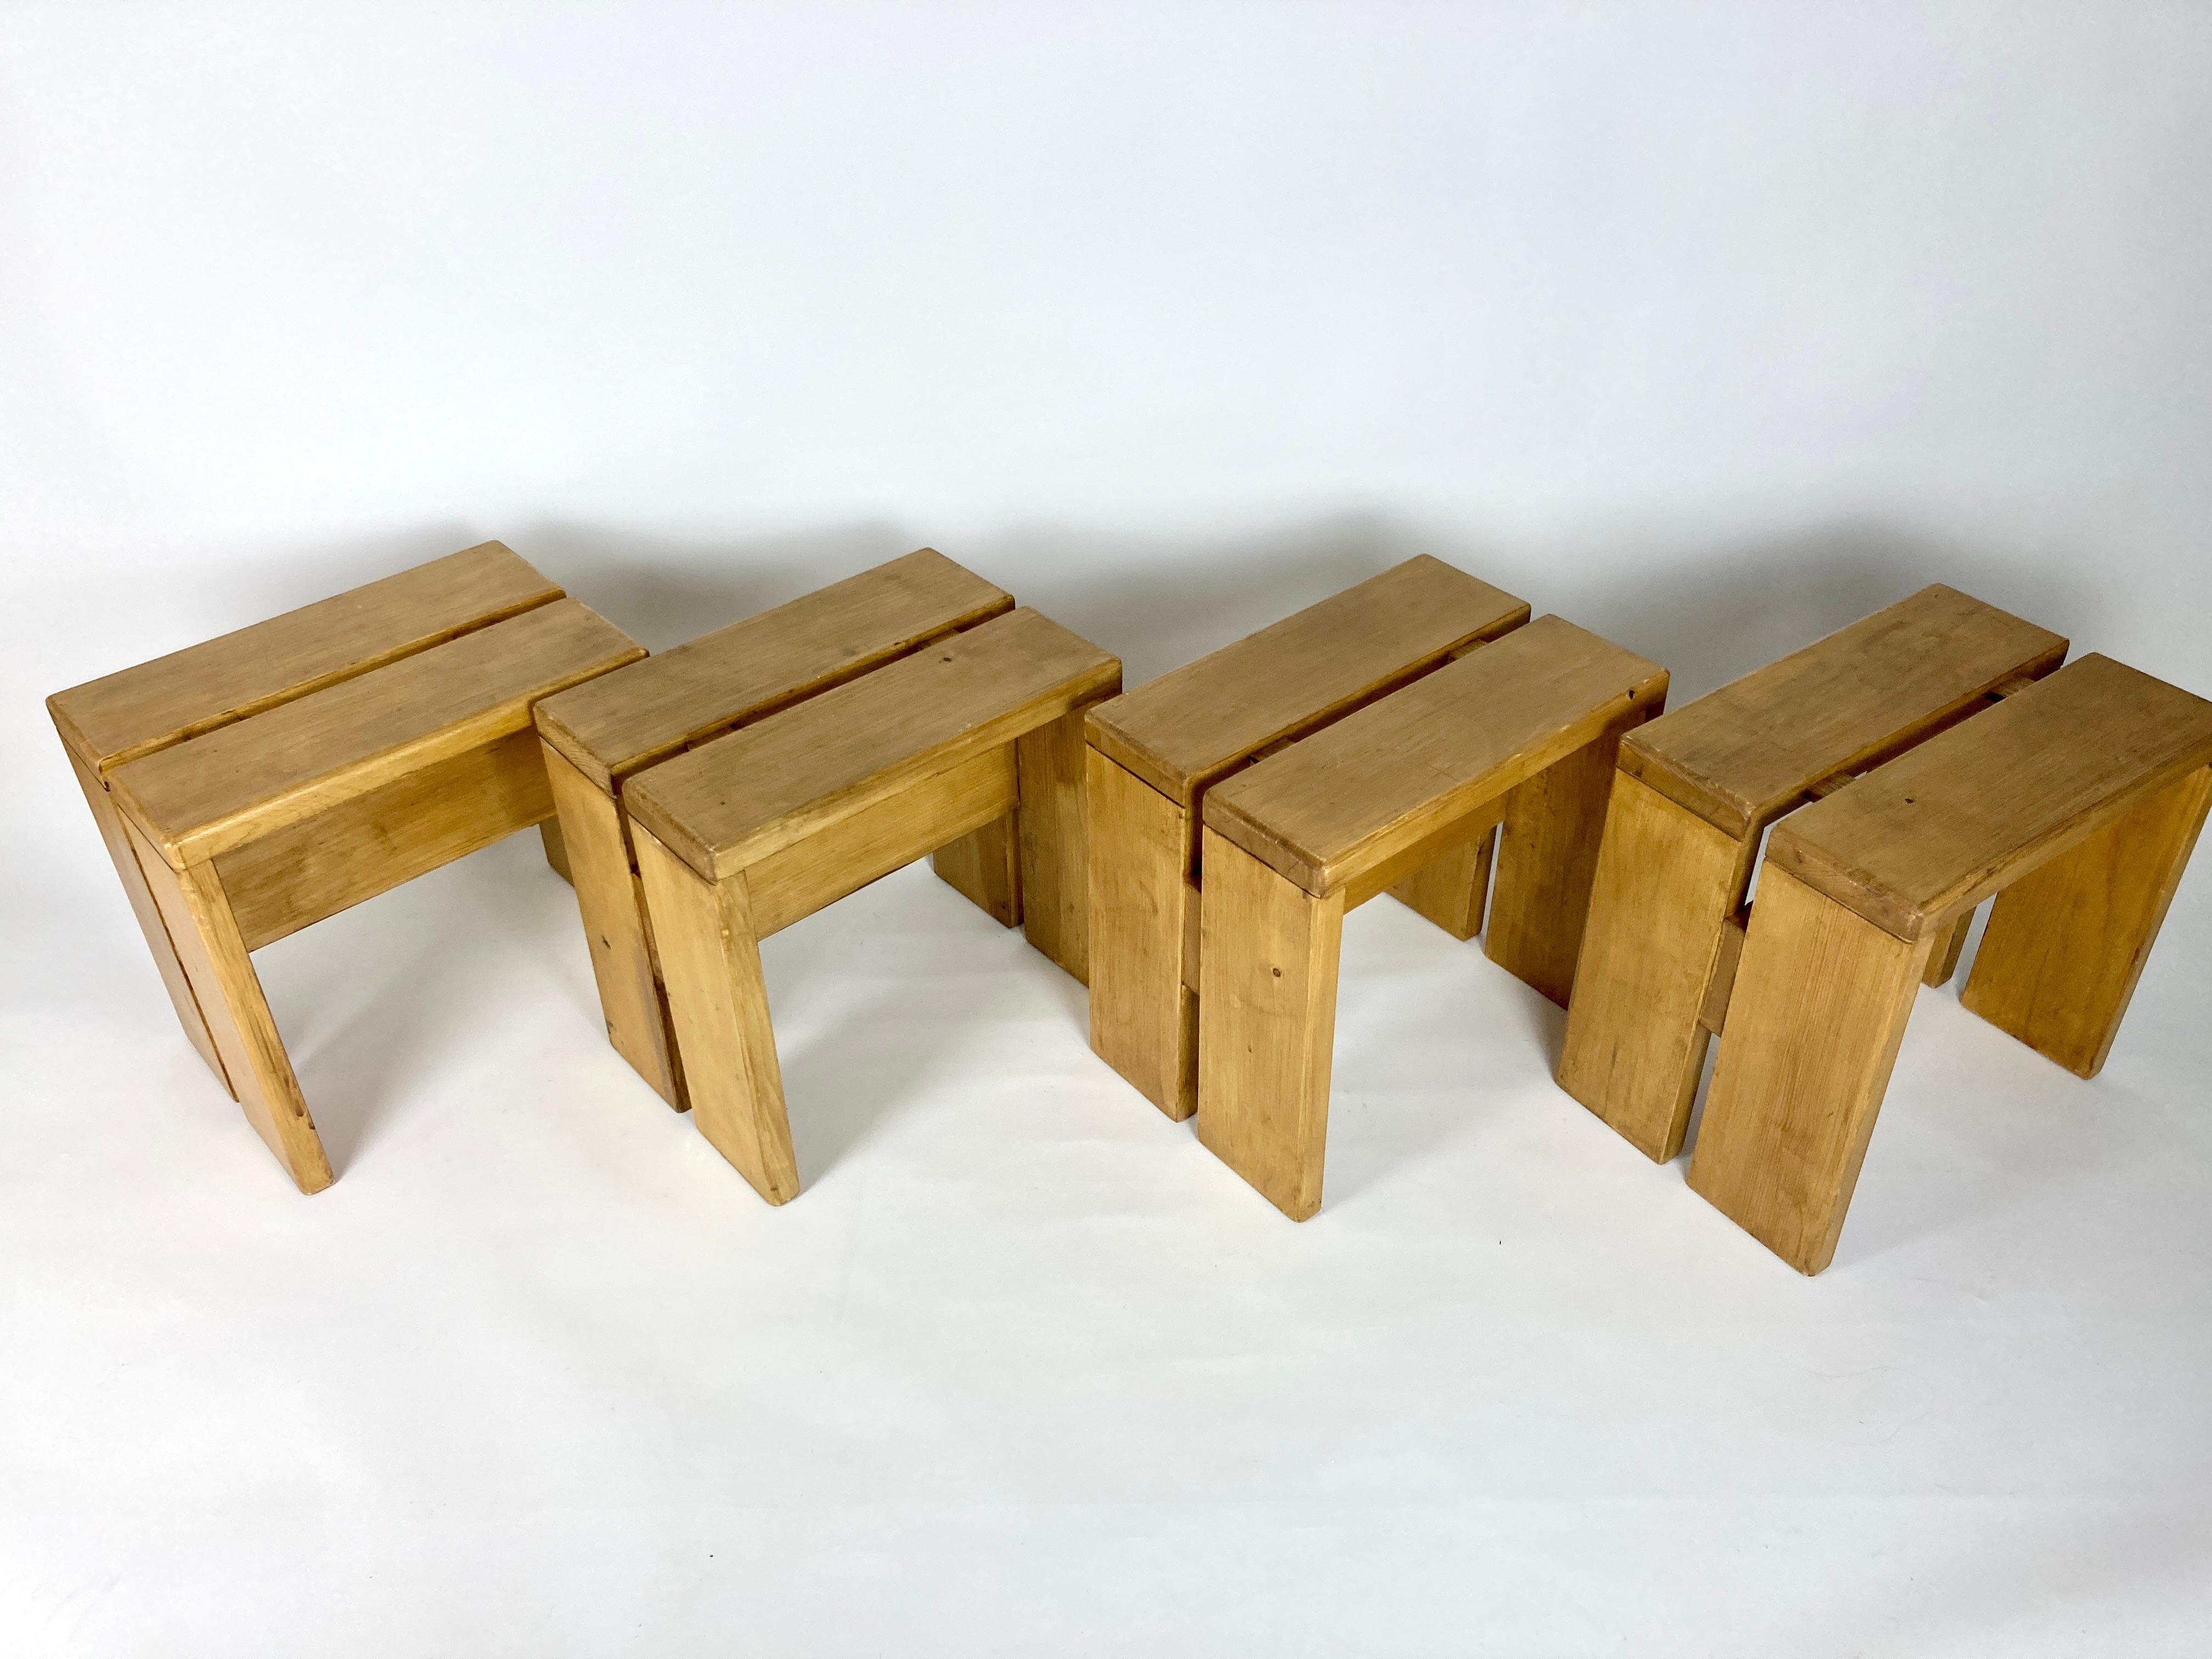 French Set of 4 Stools/Side Tables from Les Arcs, France 1970s, Charlotte Perriand